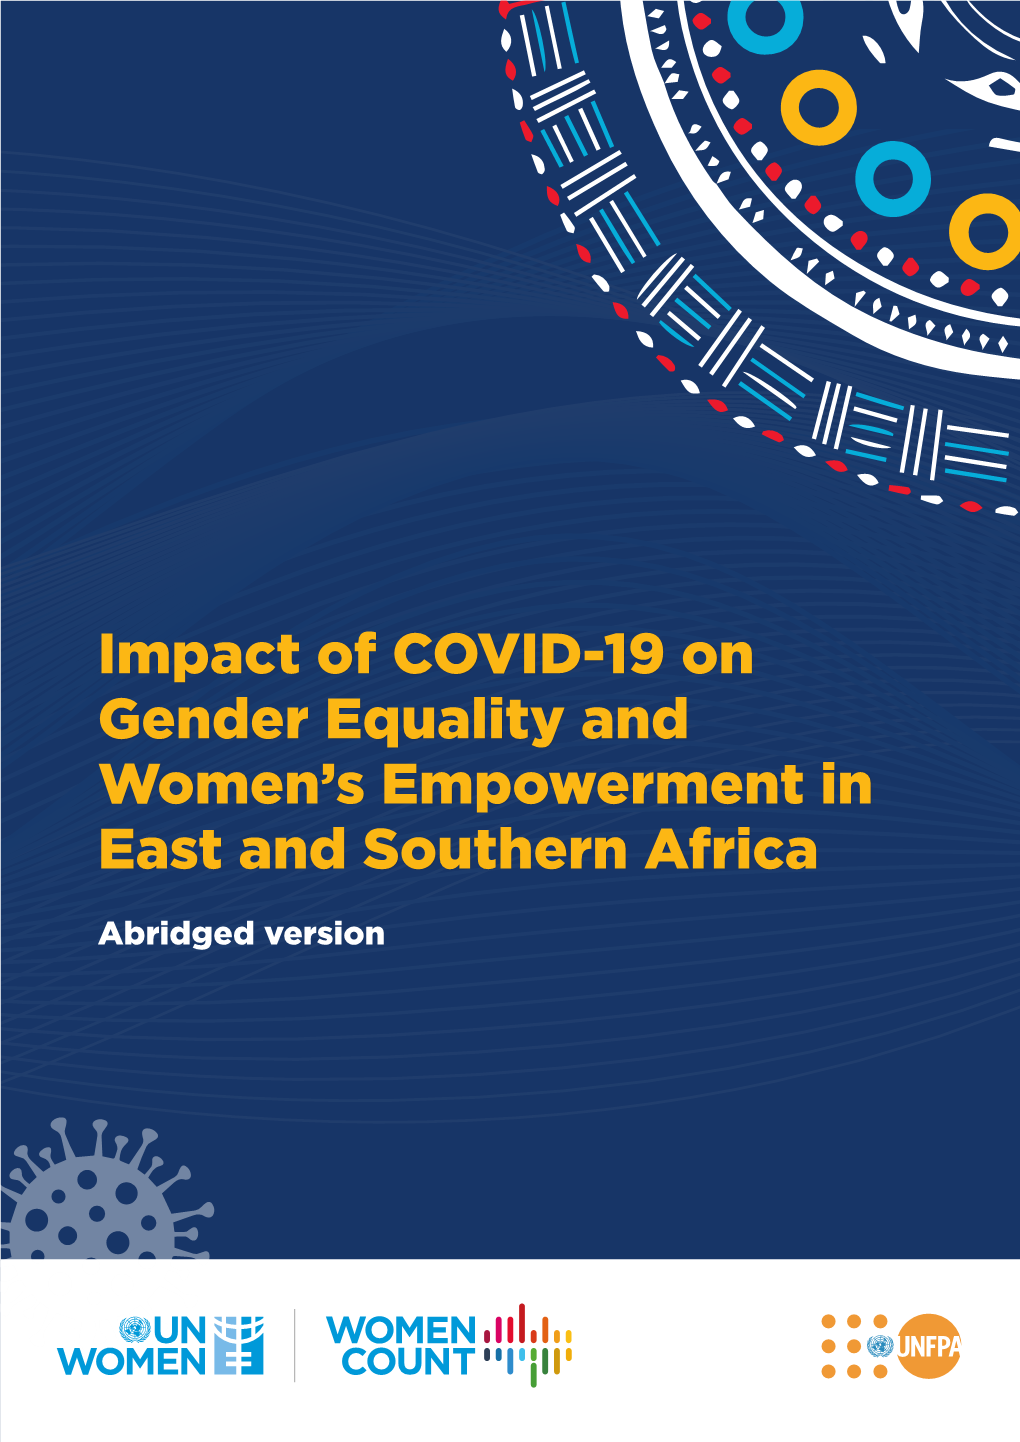 Impact of COVID-19 on Gender Equality and Women's